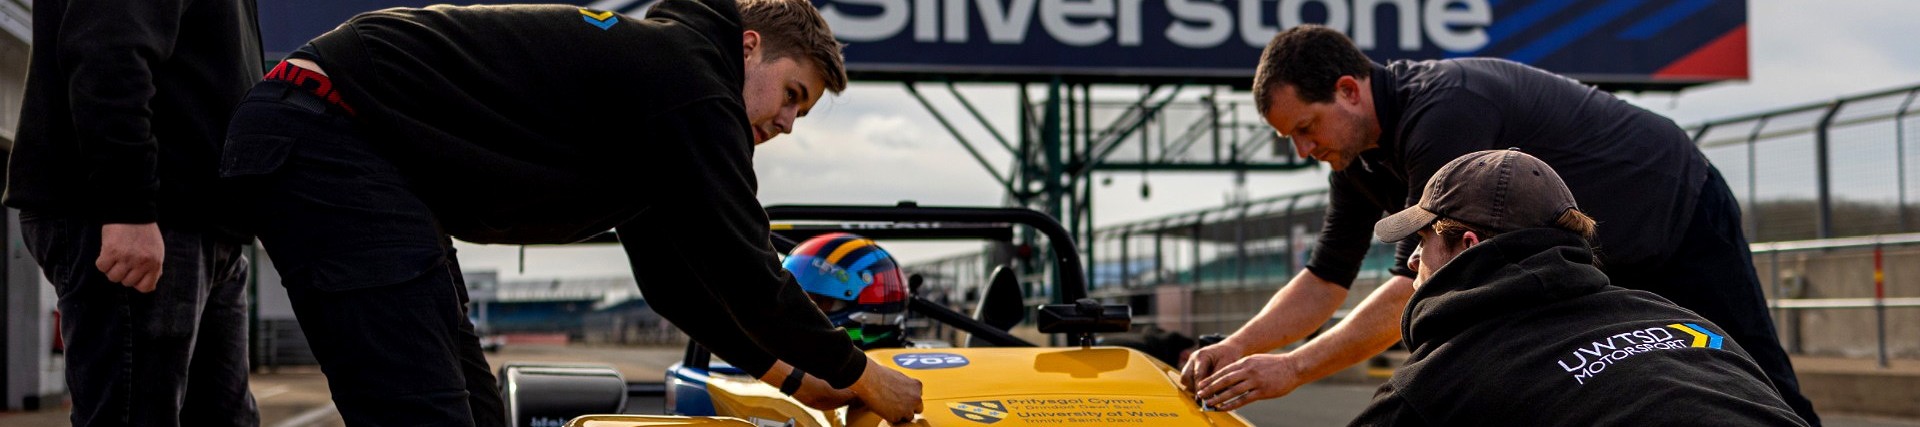 UWTSD Motorsport students bend over a yellow racing car on the track at Silverstone. 